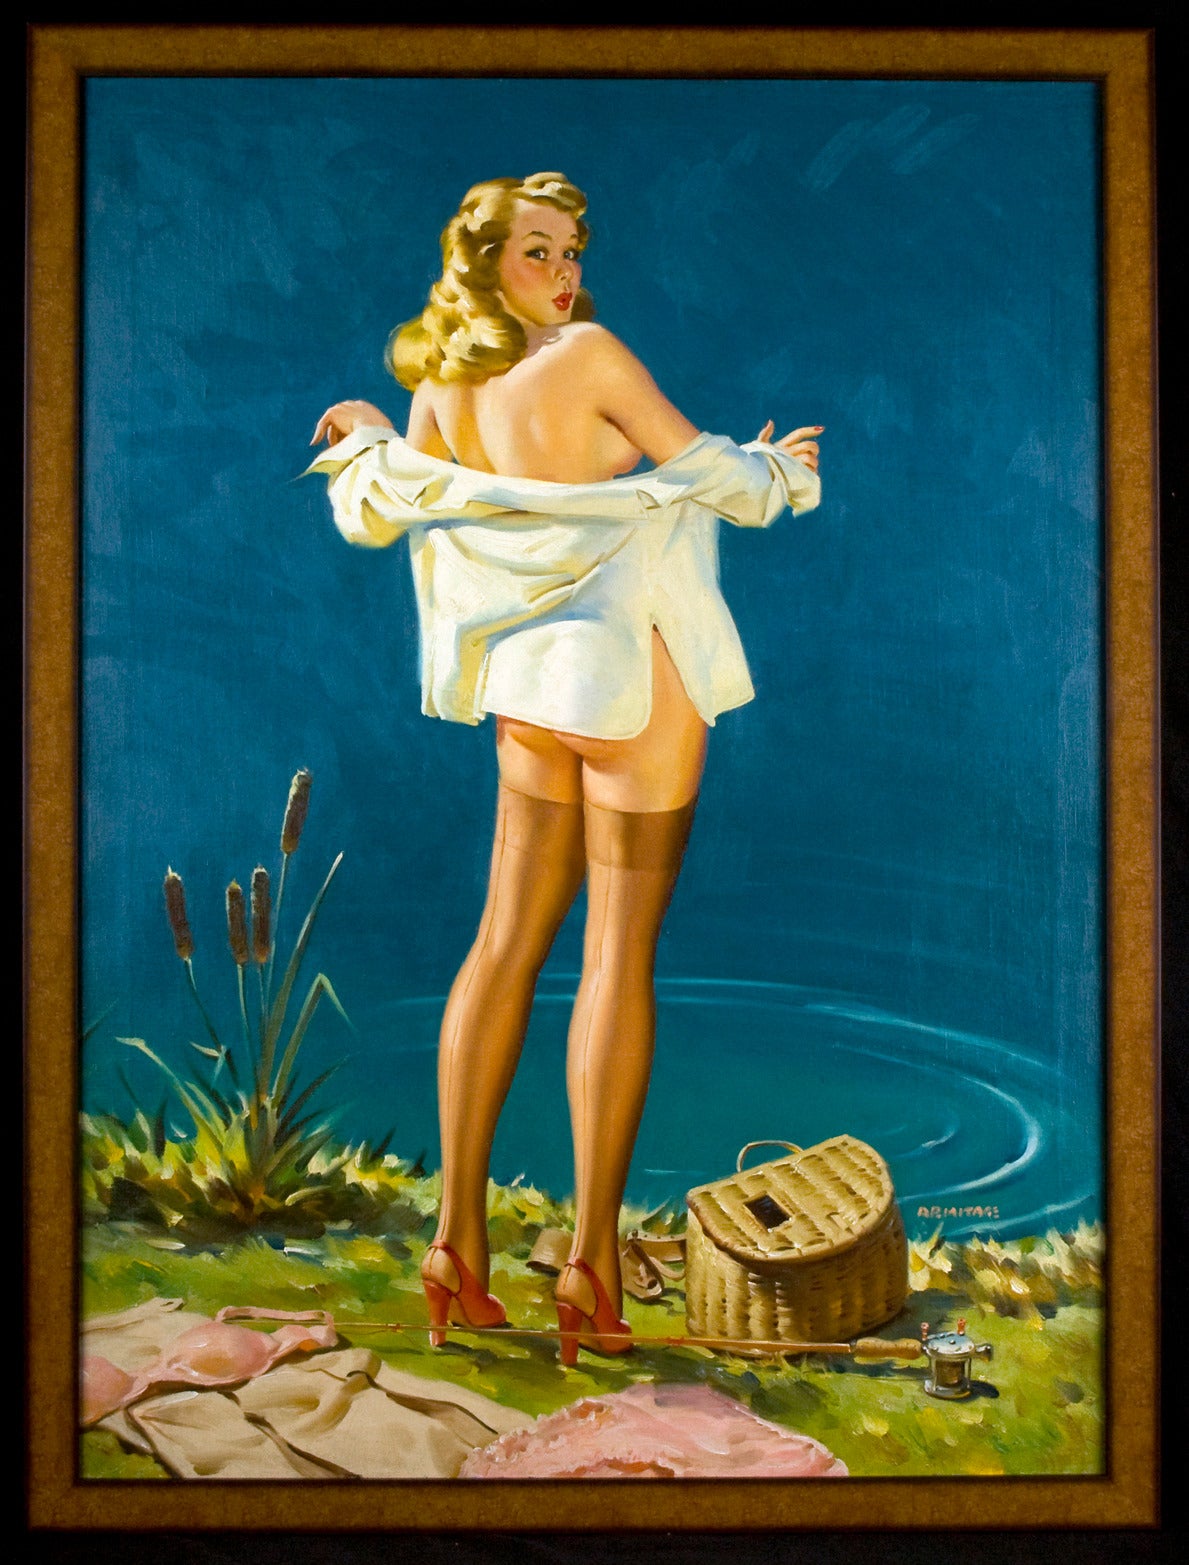 No Privacy - Painting by Arnold Armitage